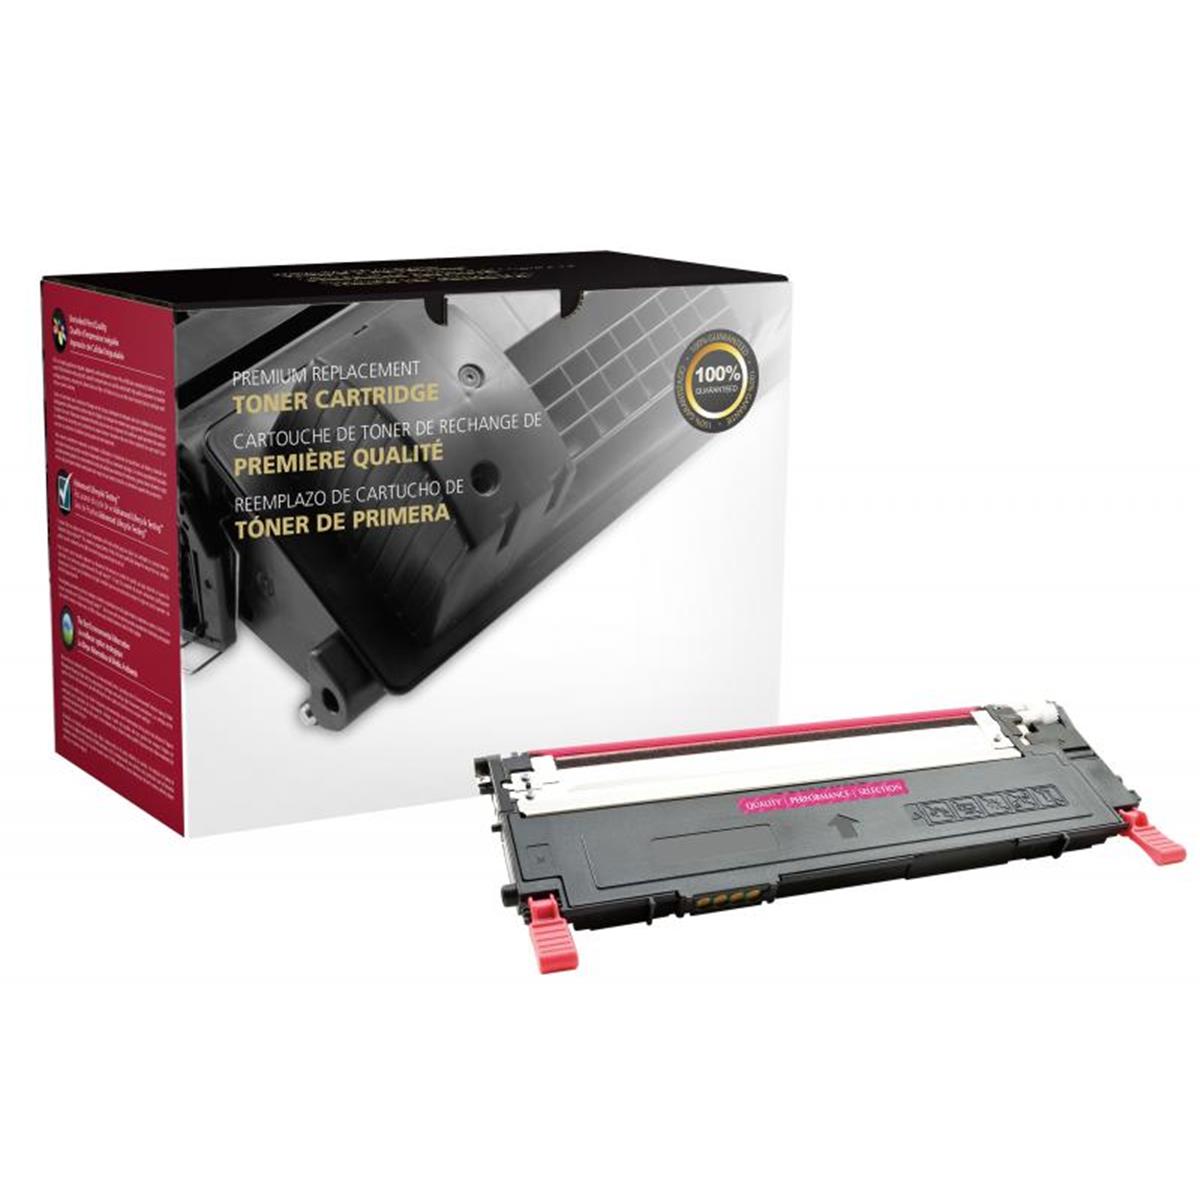 Picture of Dell 200219P Magenta Toner Cartridge for Dell 1230 & 1235